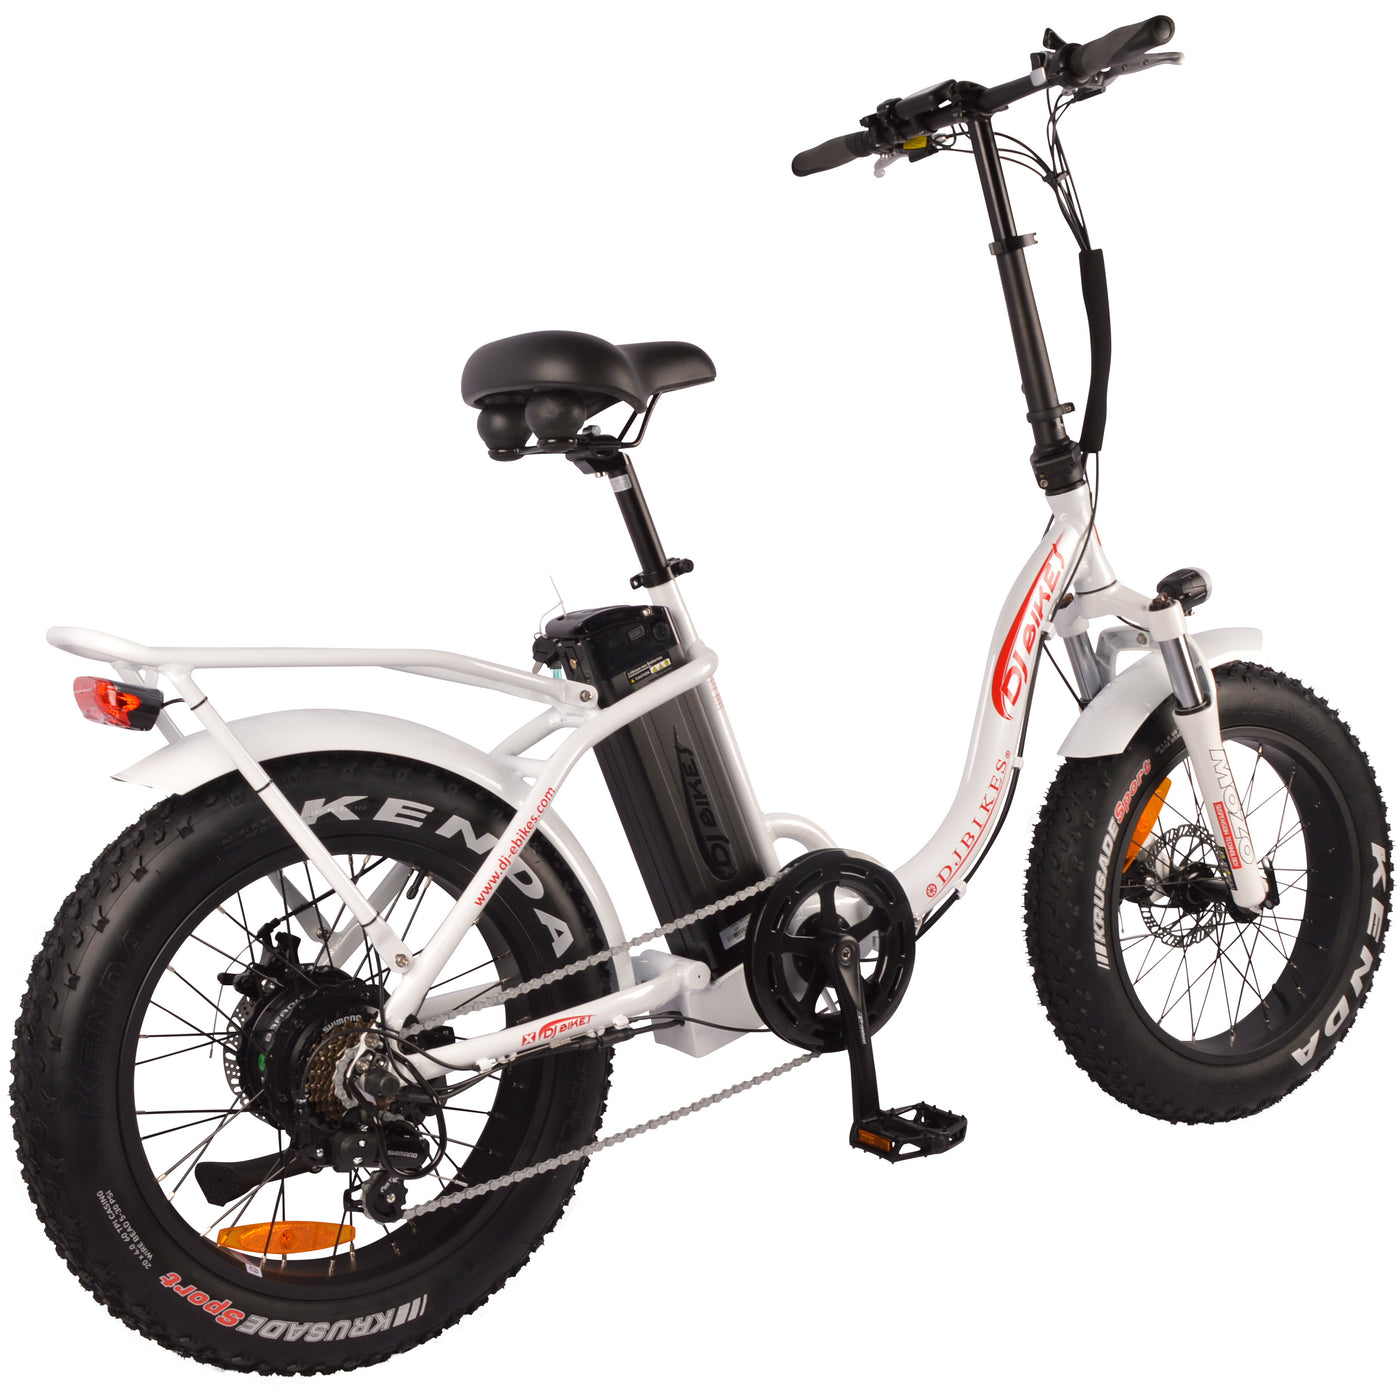 DJ Bikes great value for a folding electric bike, loaded with accessories, fenders, racks and more